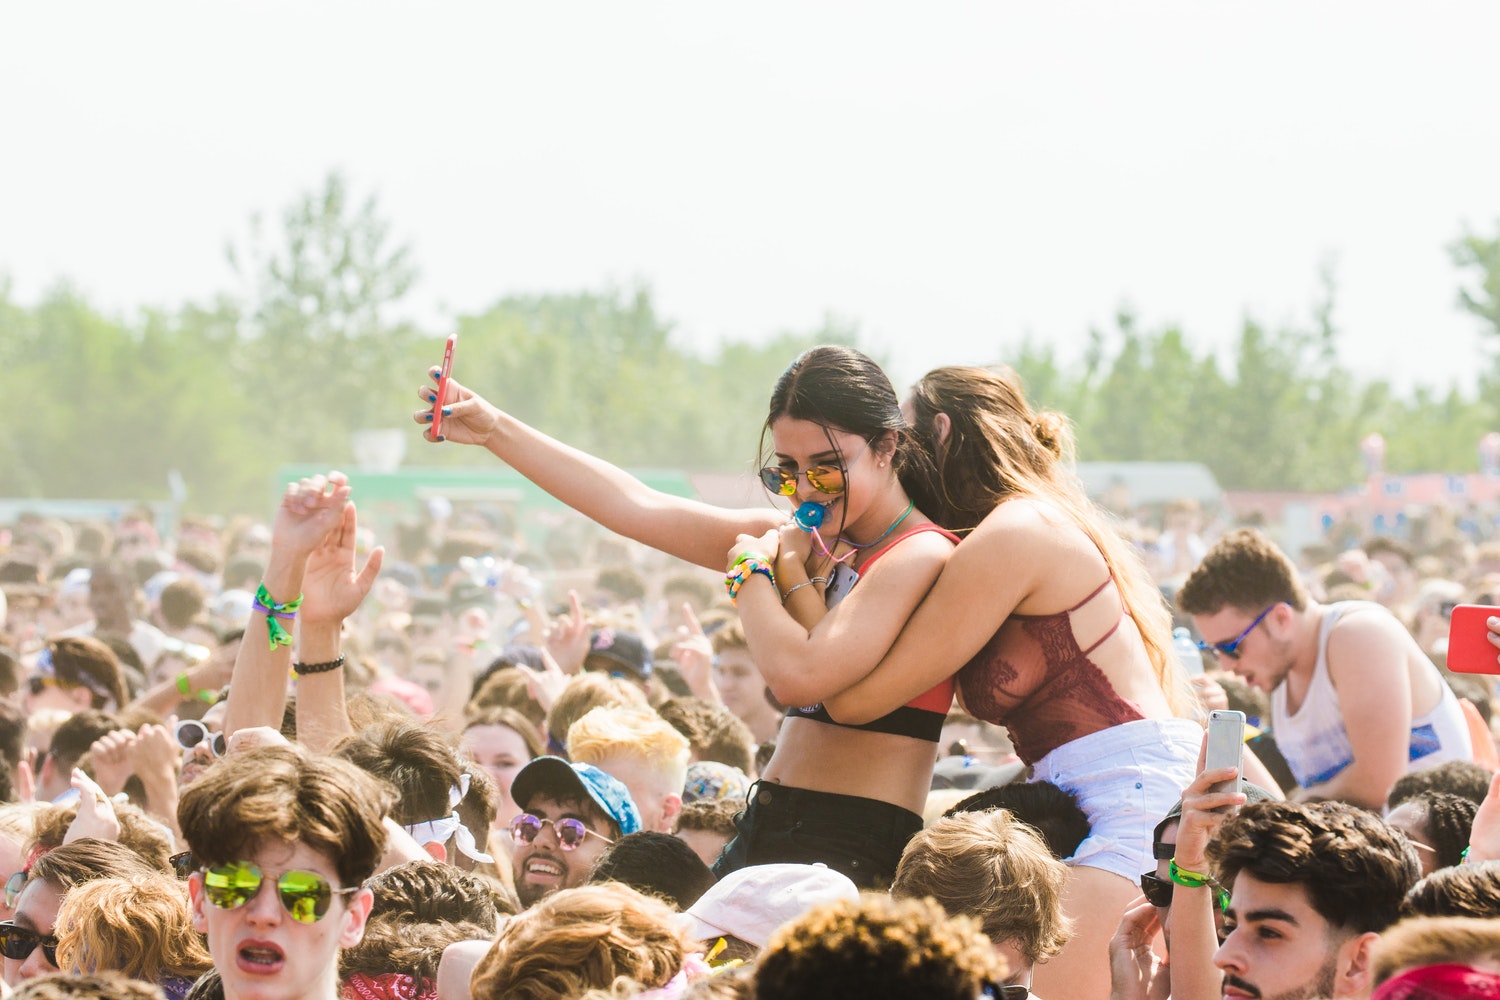 Music Festival Outfits: What To Wear At a Music Festival